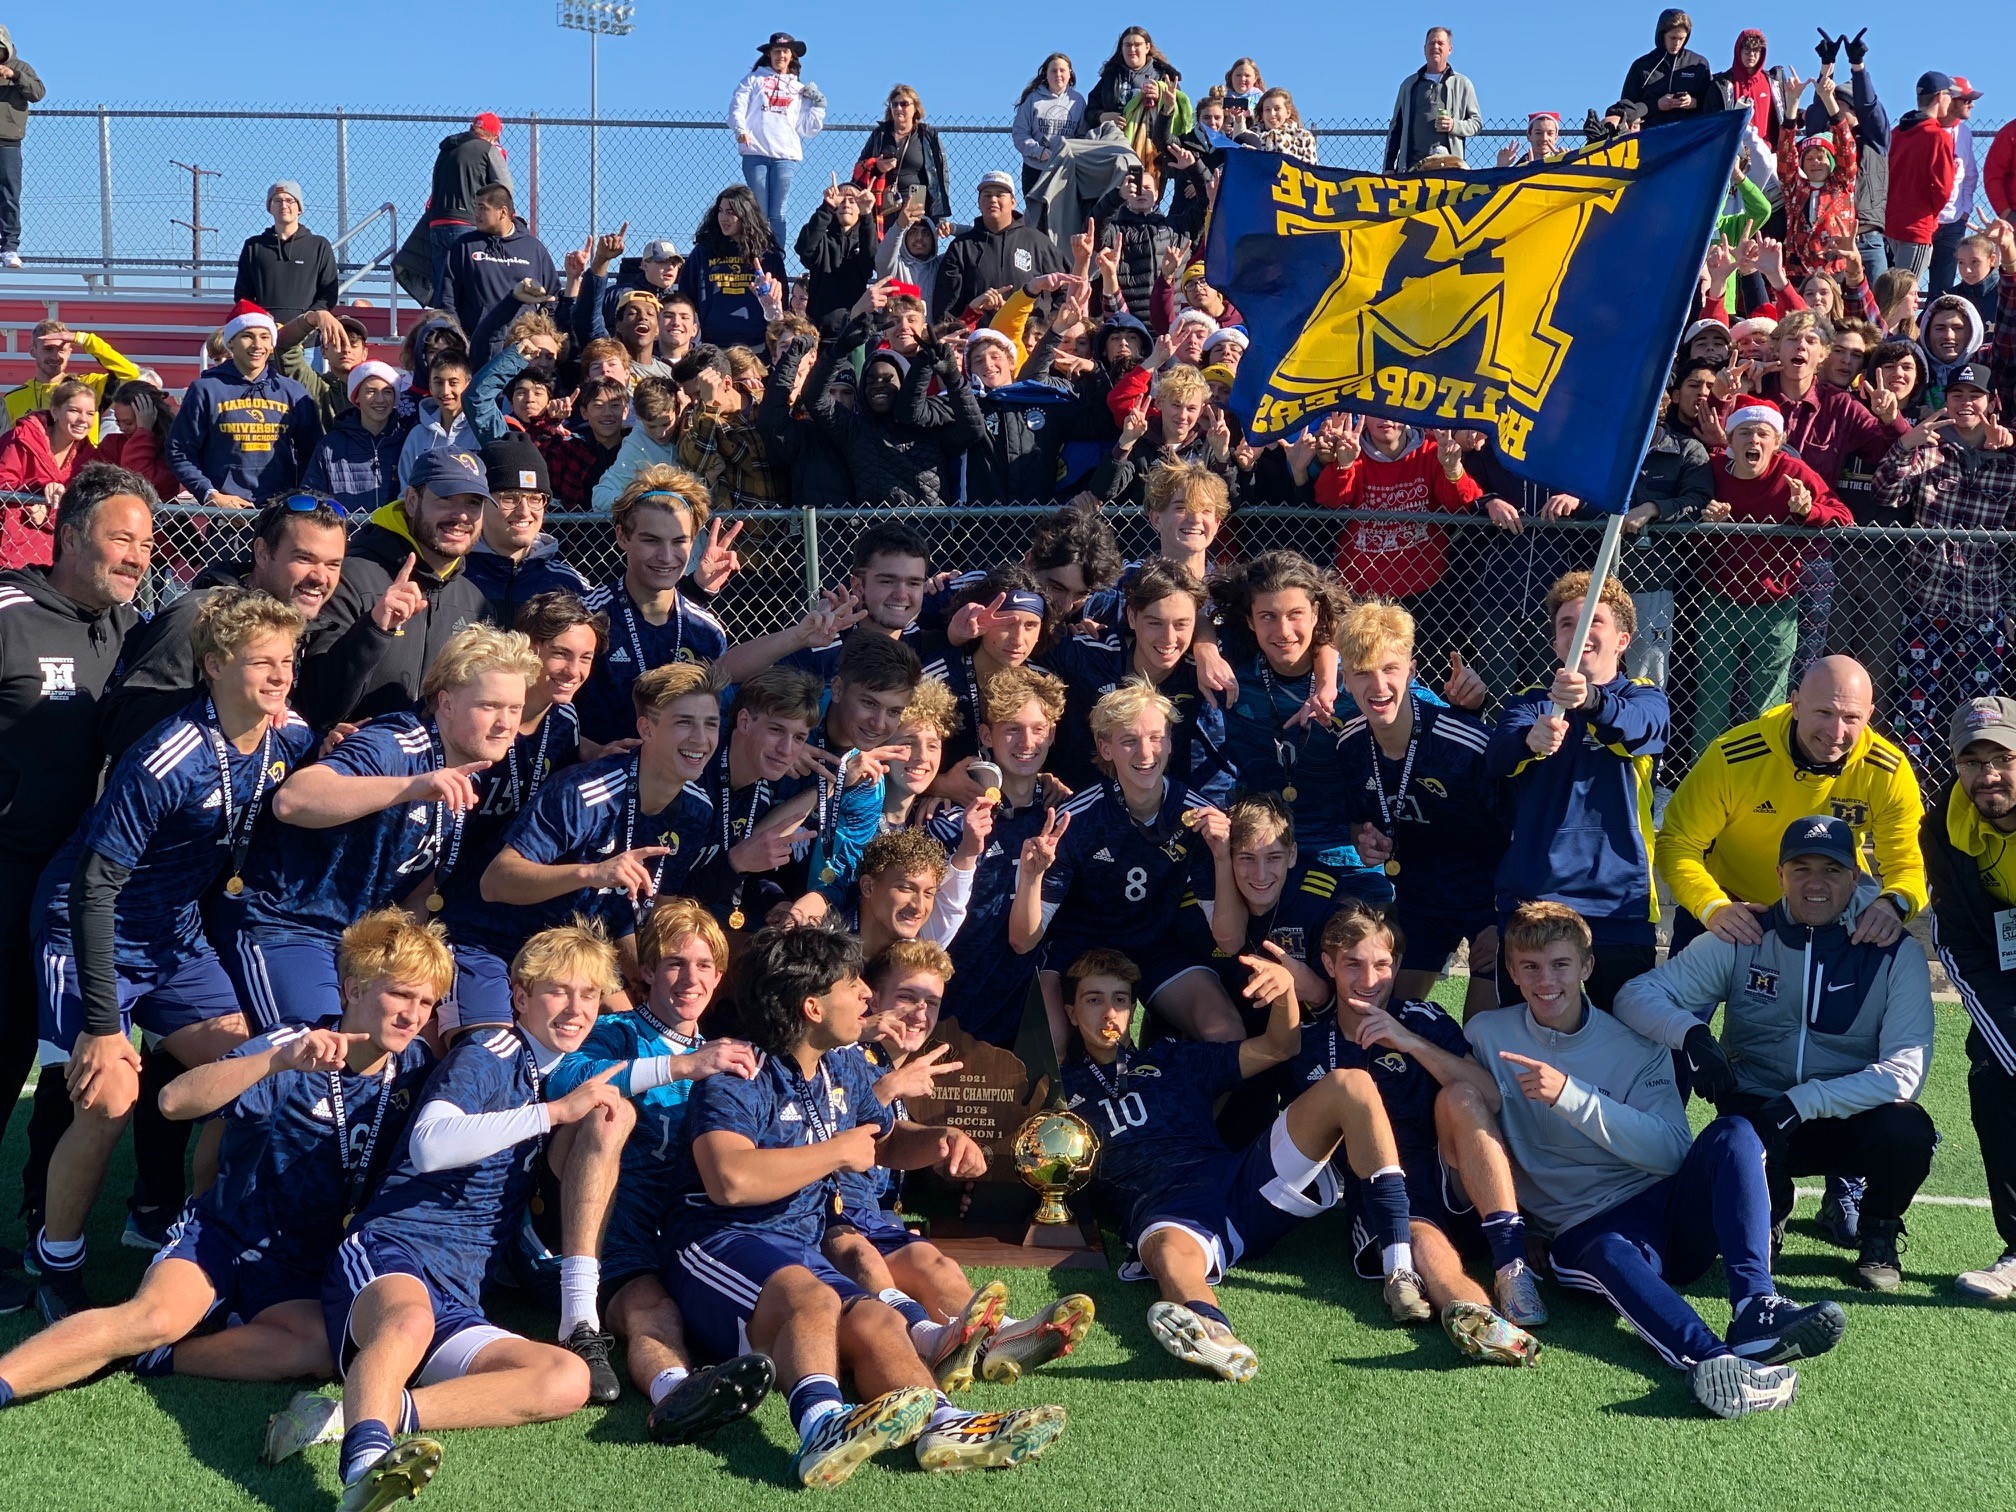 Marquette High School soccer team posing on field after winning 2021 state championship